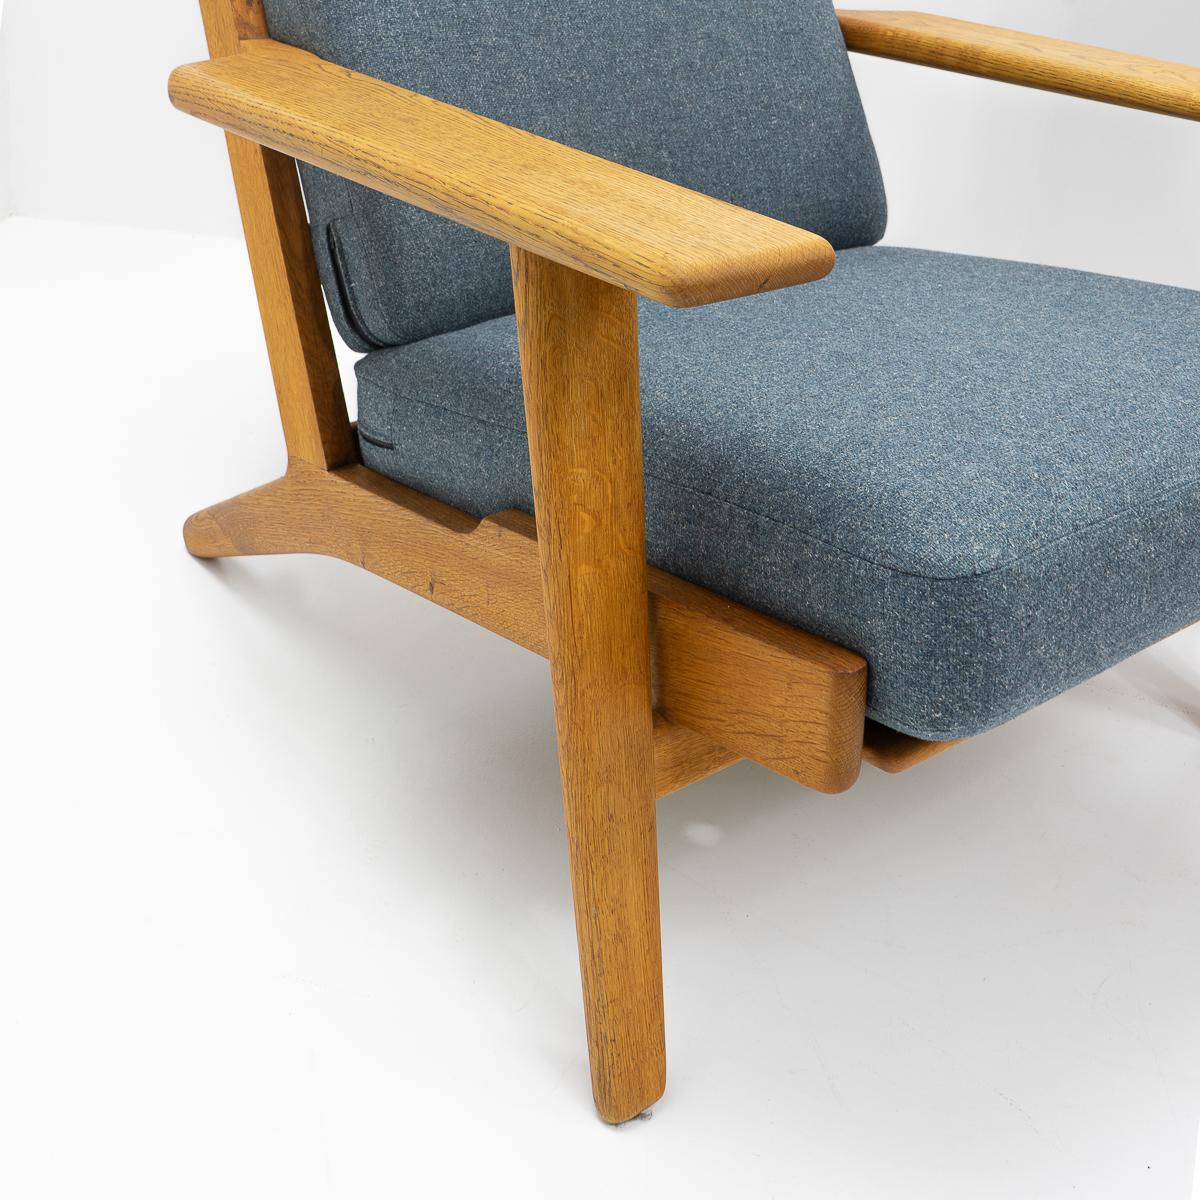 Danish Design Classic GE 290 Arm Chairs by Hans Wegner for Getama, 1960s For Sale 2